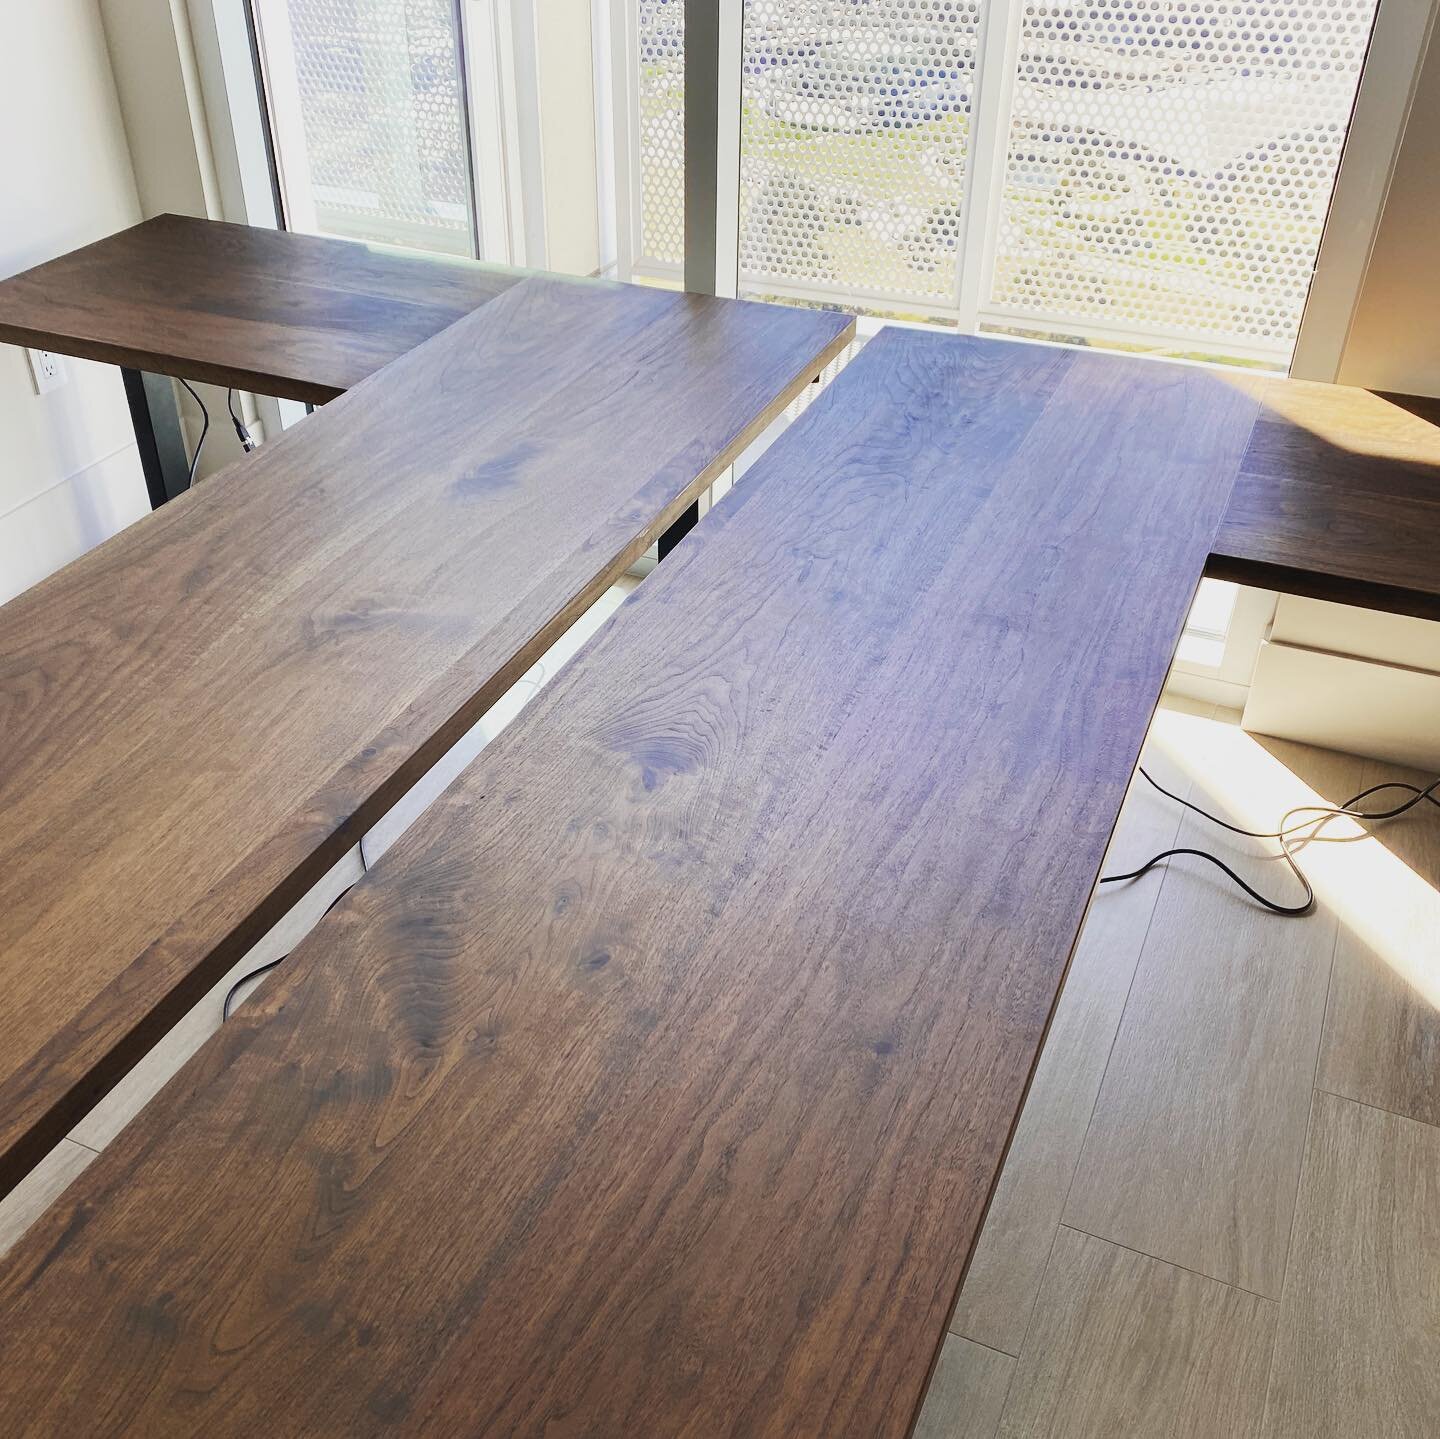 Just delivered this pair of L Stand Up Desks. Walnut. More pics to come. But wow, that view!! #customfurniture #handmade #handbuilt #madeinatx #austinfurniture #walnut #desk #furniture #shopwhereitsmade